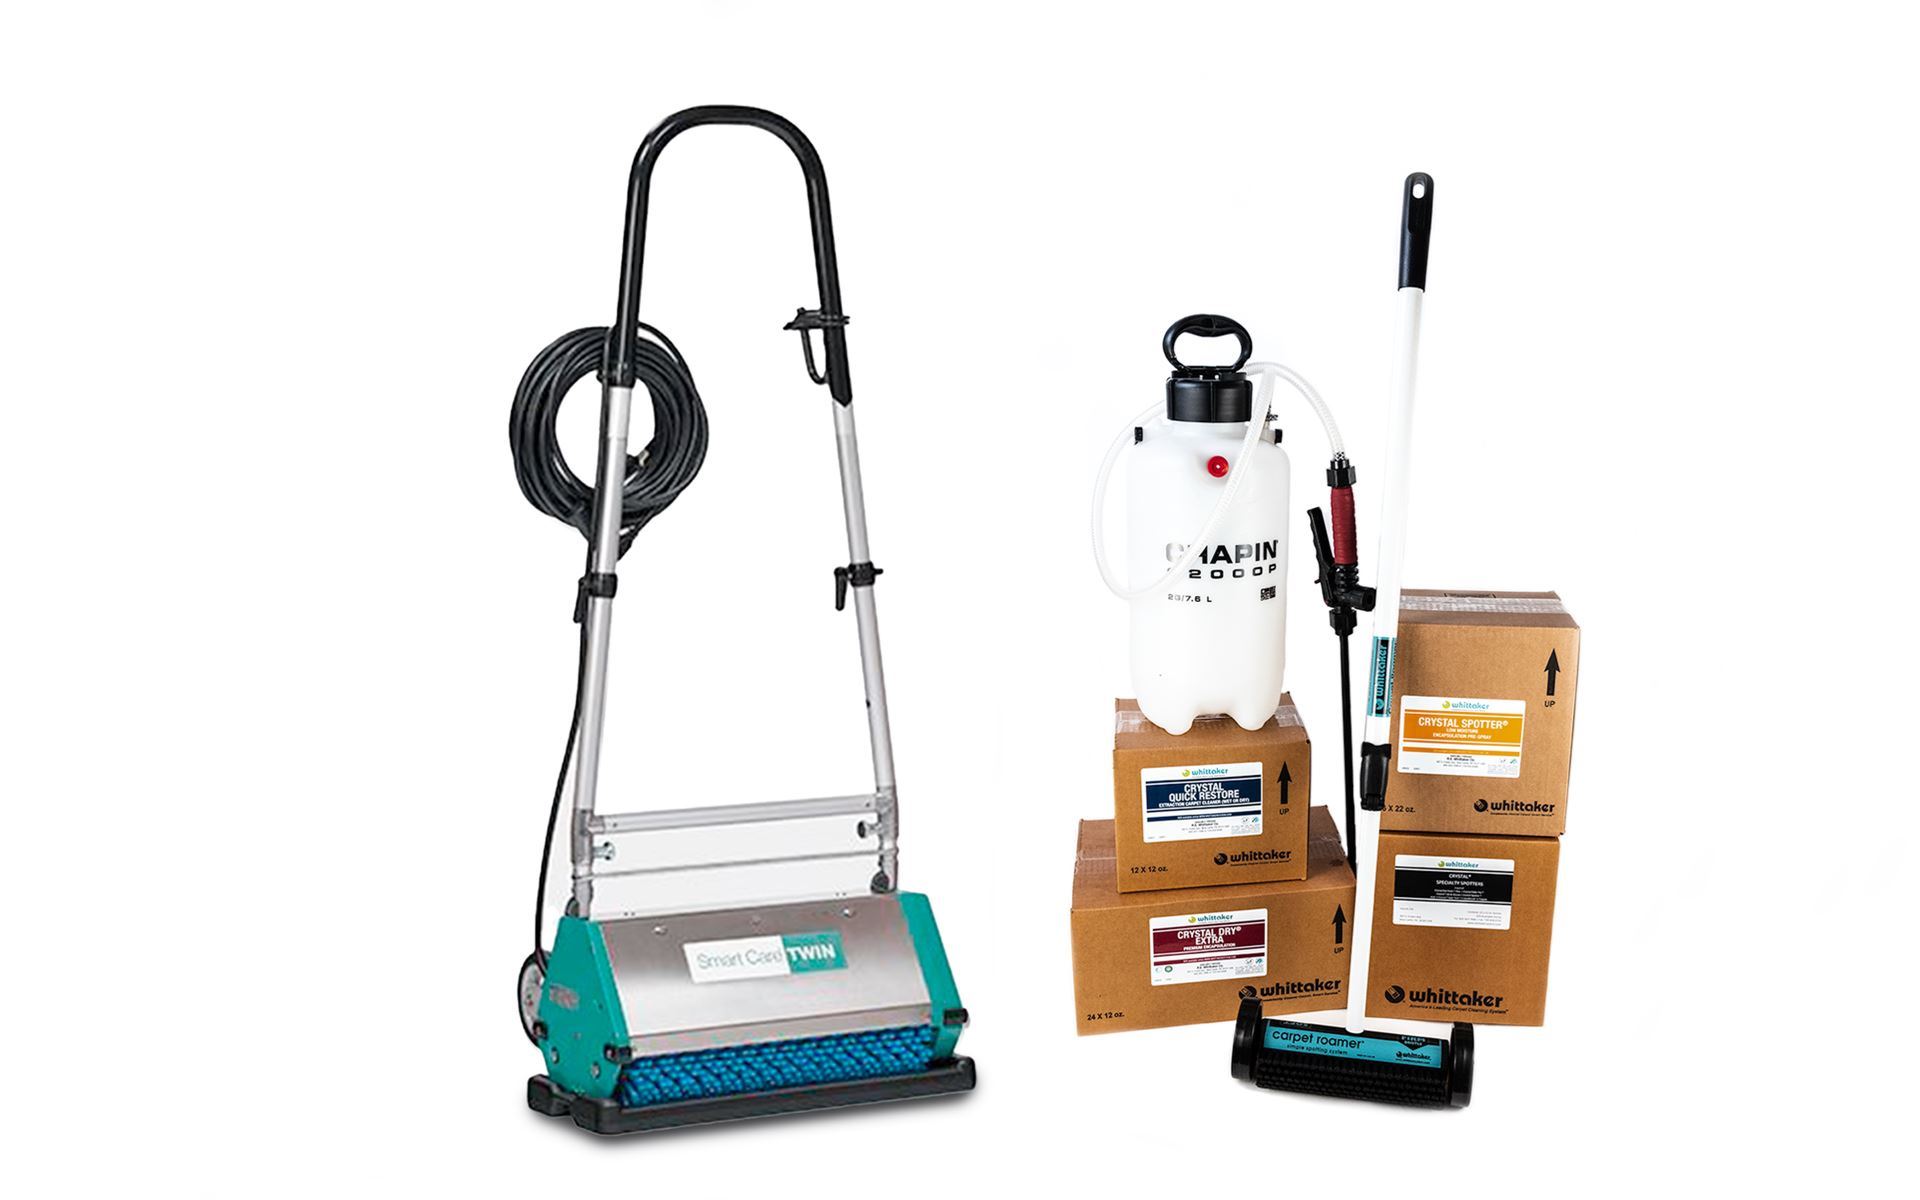 Smart Care Twin Standard 15 Carpet Cleaner Whittaker System